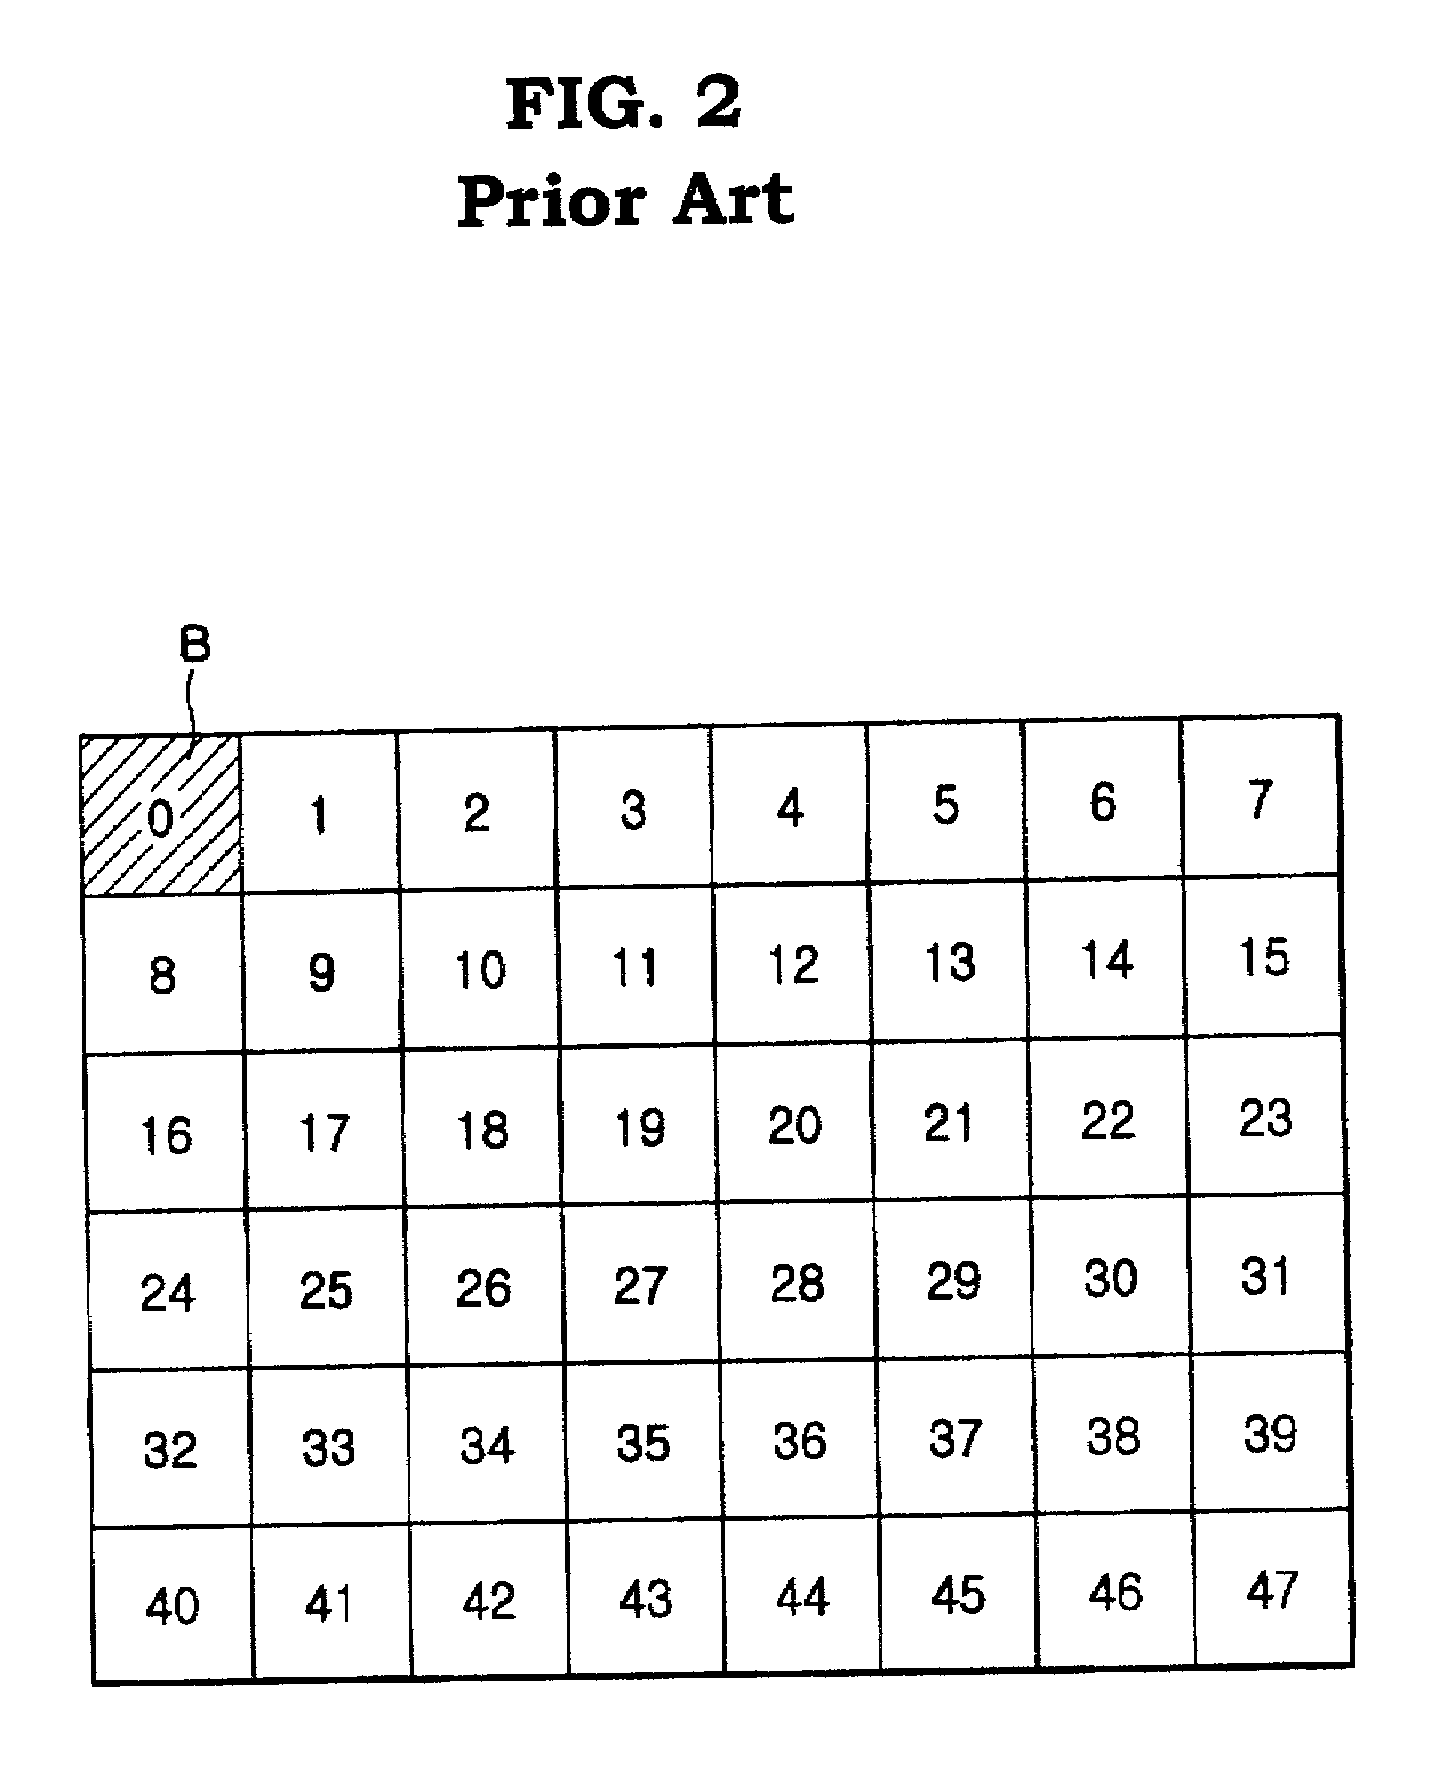 Fingerprint image acquisition apparatus and method thereof